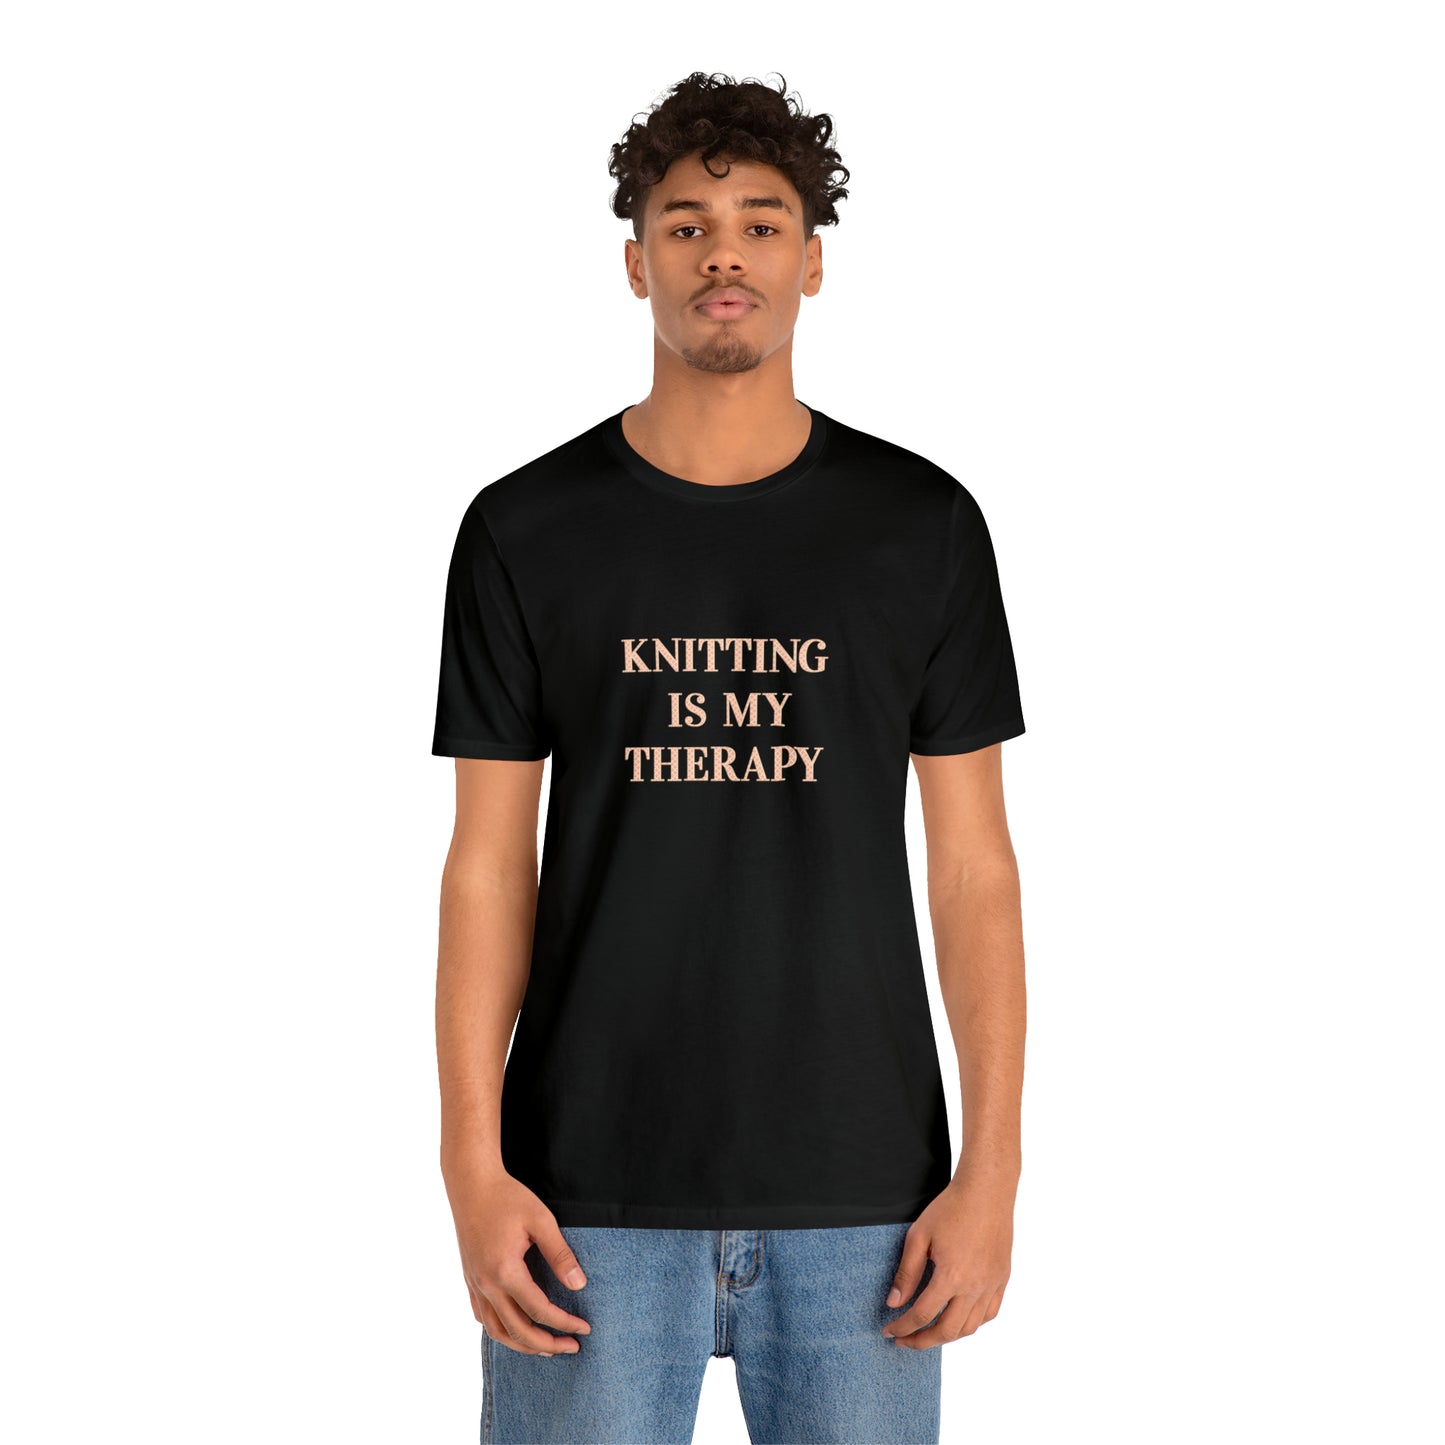 Knitting Is My Therapy- Adult, Regular Fit, Smaller Size Image, Soft Cotton, T-shirt